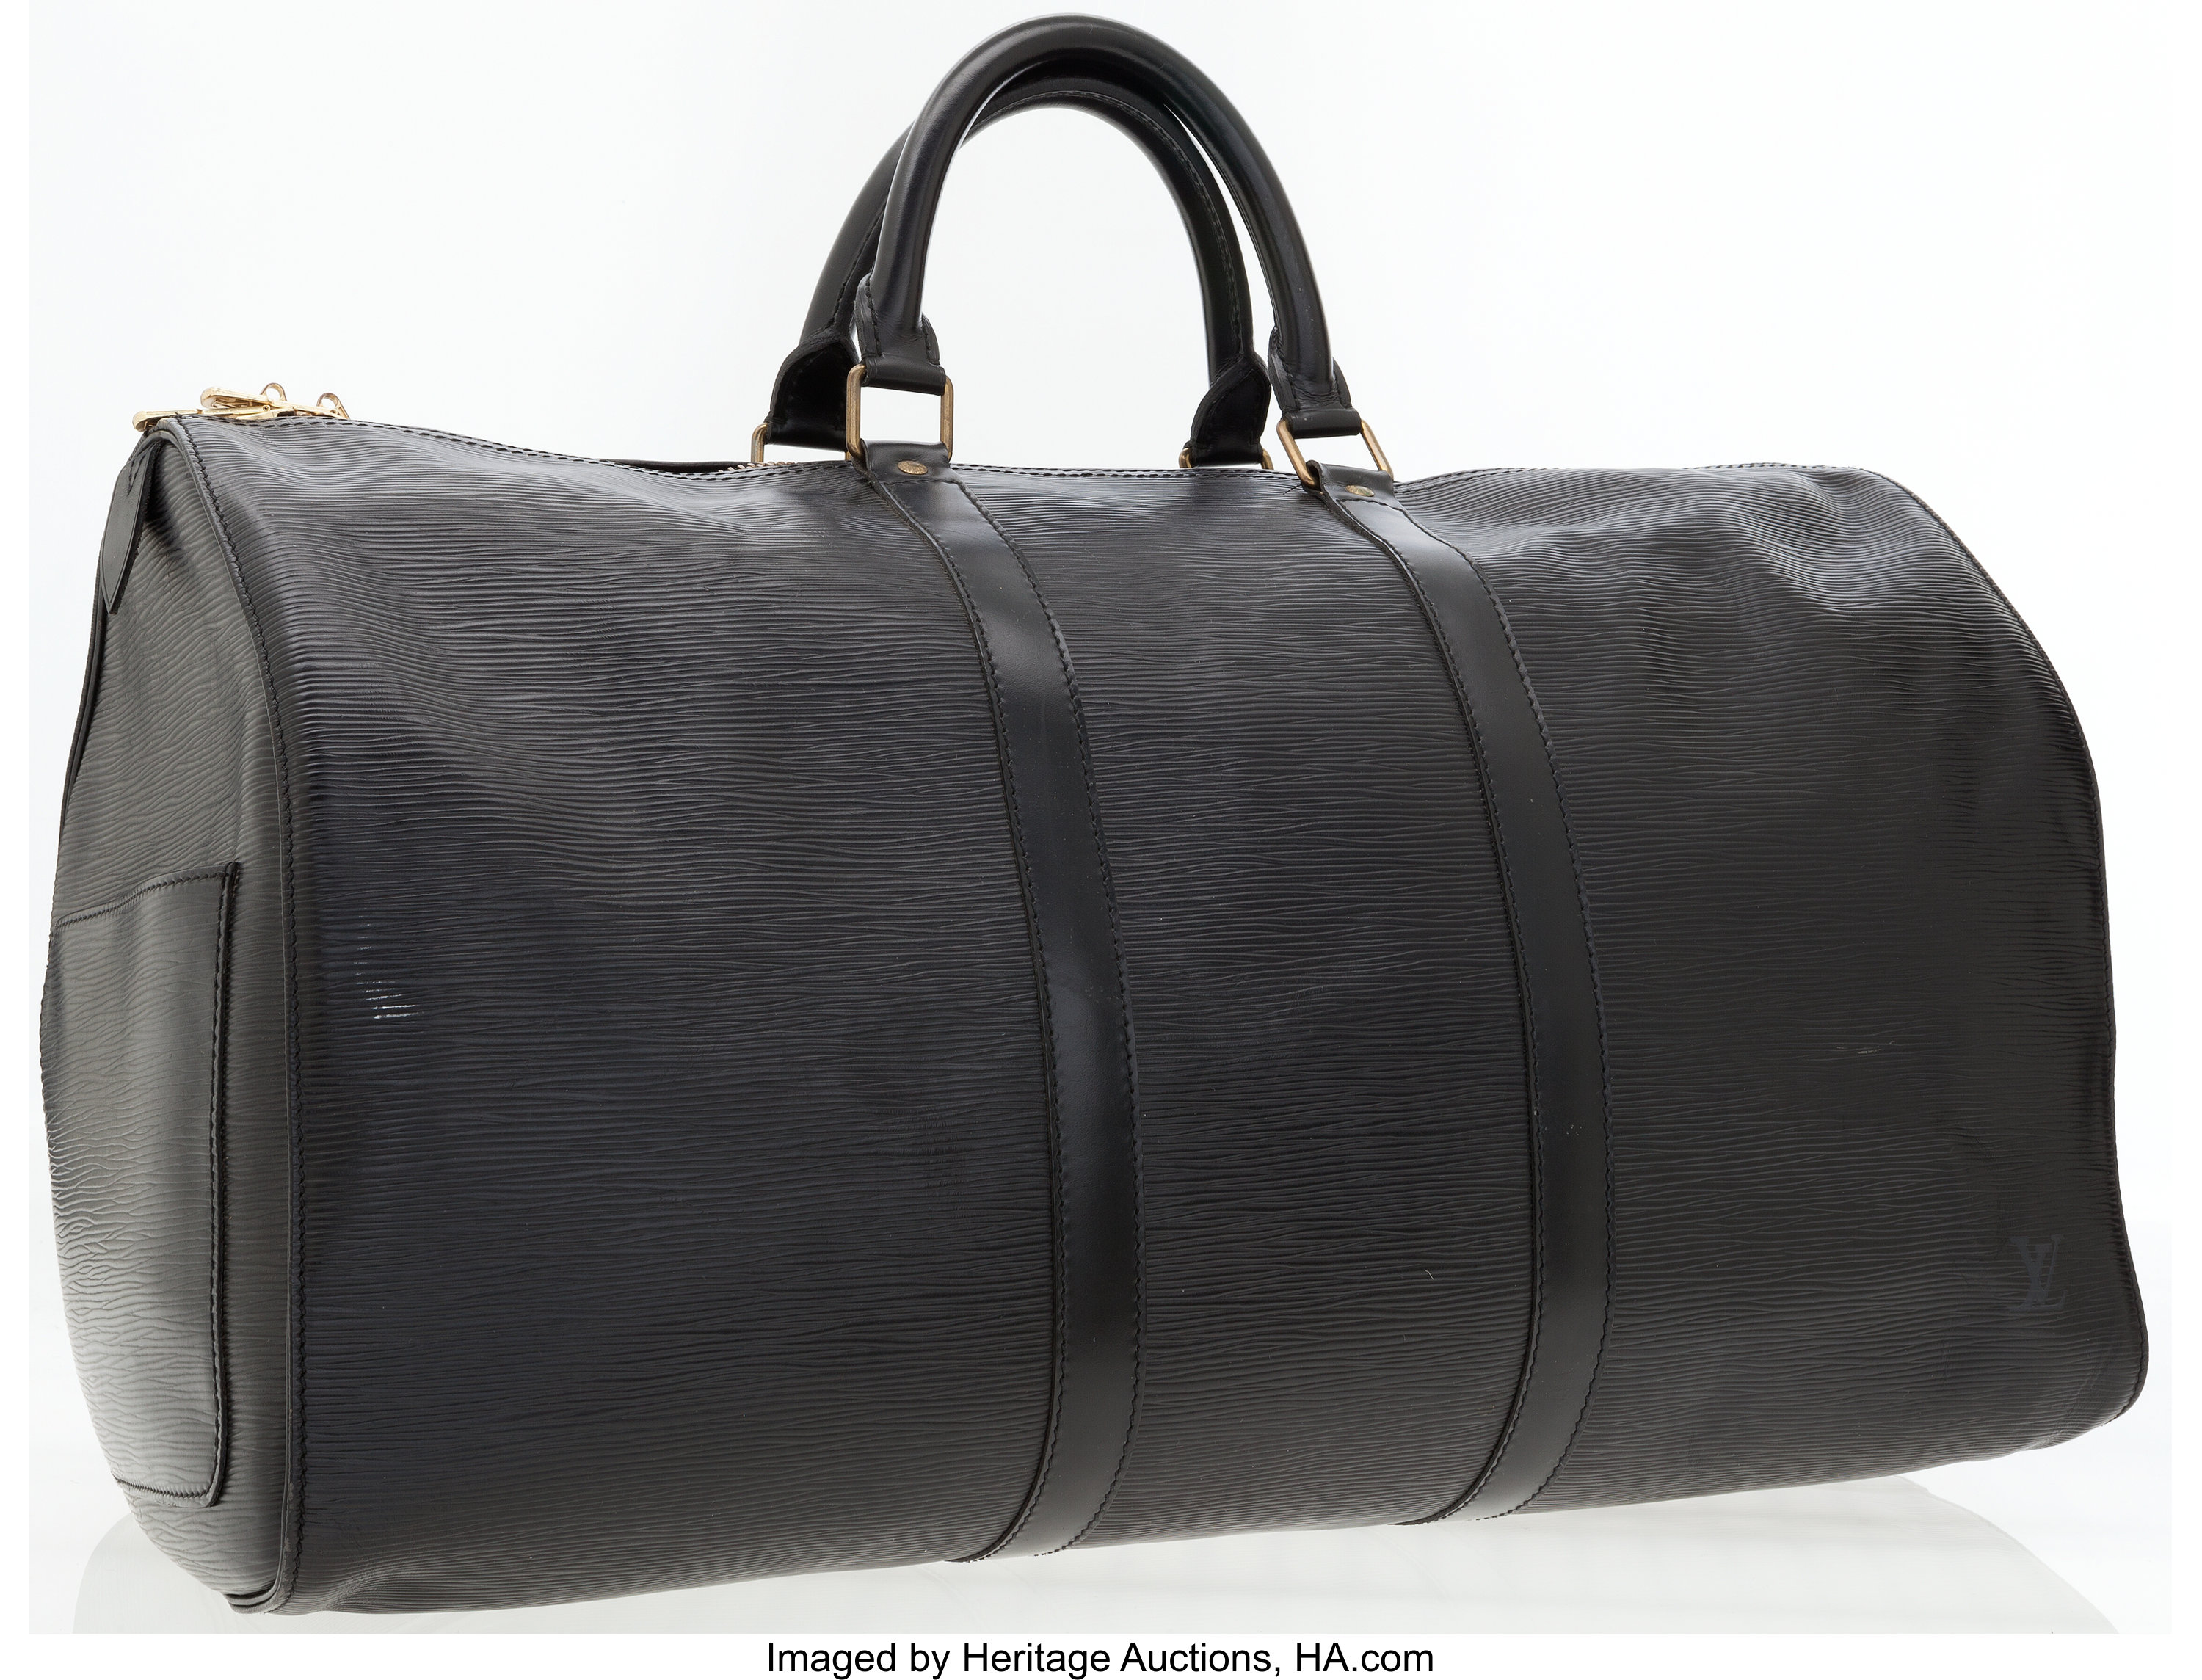 Sold at Auction: LOUIS VUITTON 'KEEPALL 50' EPI LEATHER TRAVEL BAG